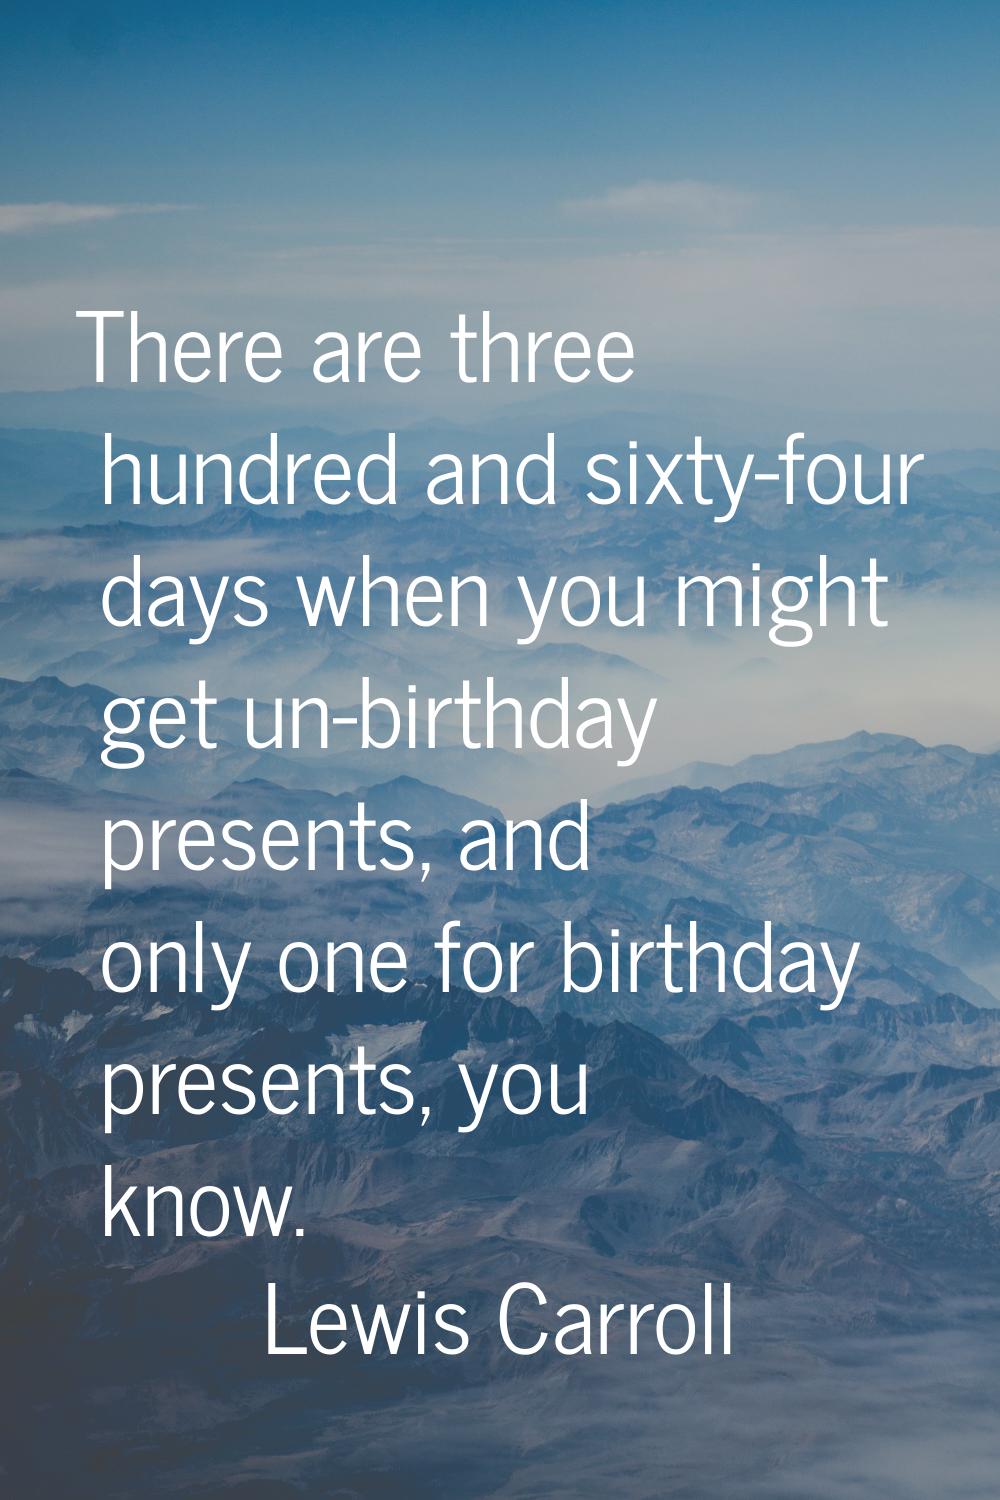 There are three hundred and sixty-four days when you might get un-birthday presents, and only one f